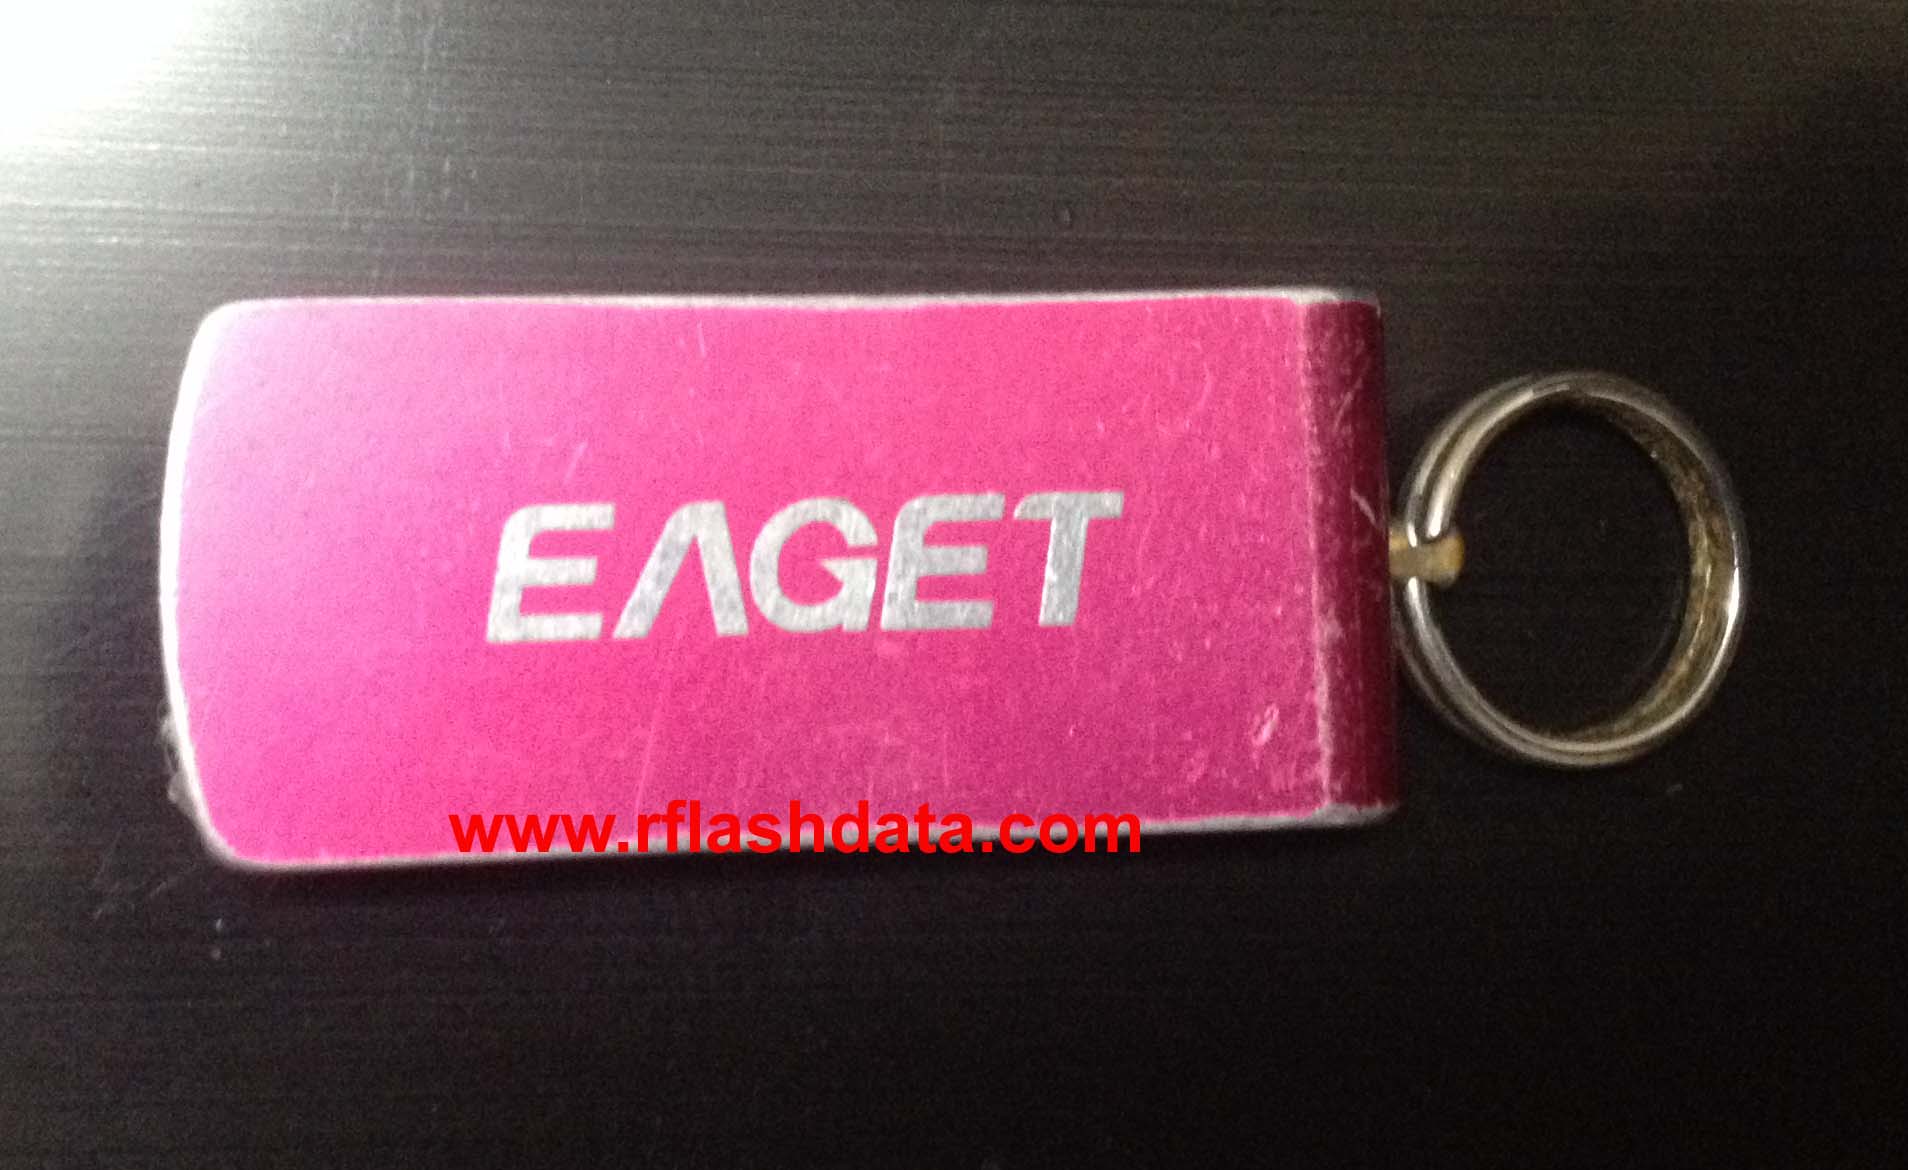 EAGGET data recovery